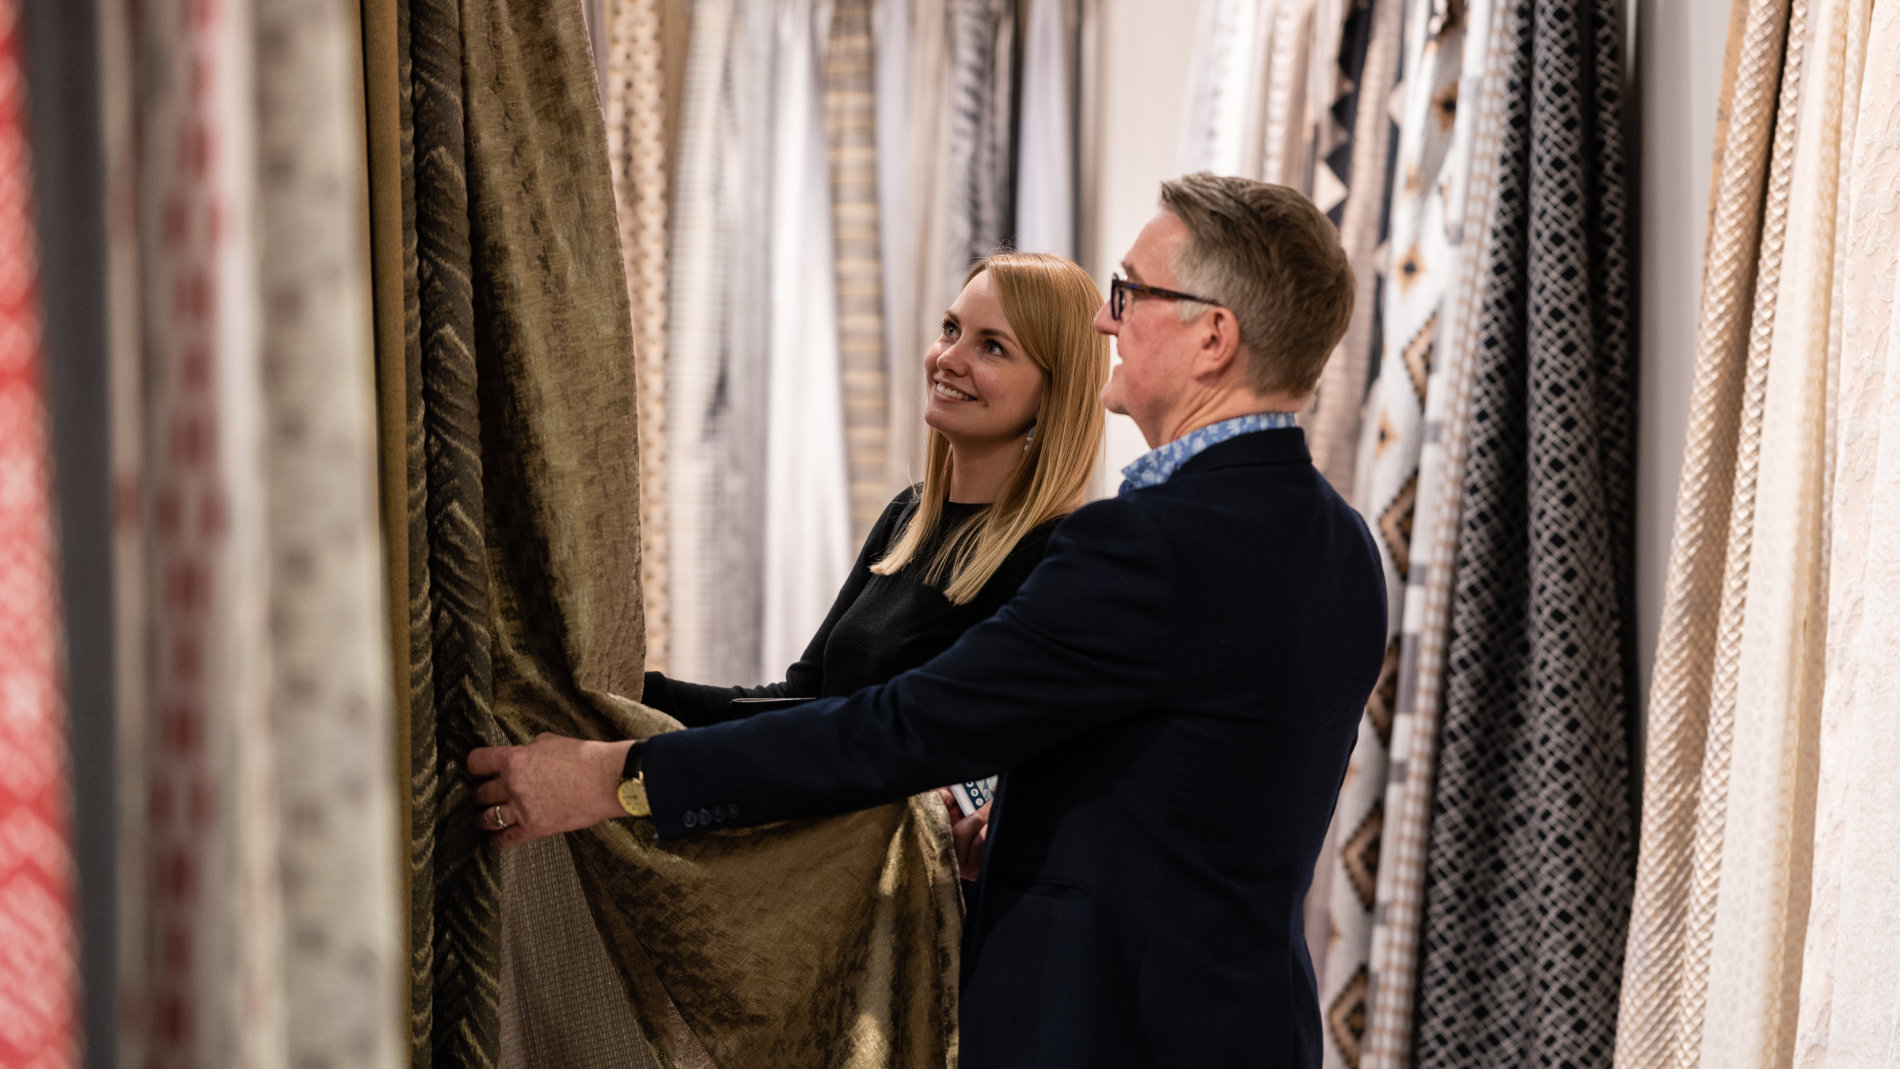 Heimtextil visitor and exhibitor